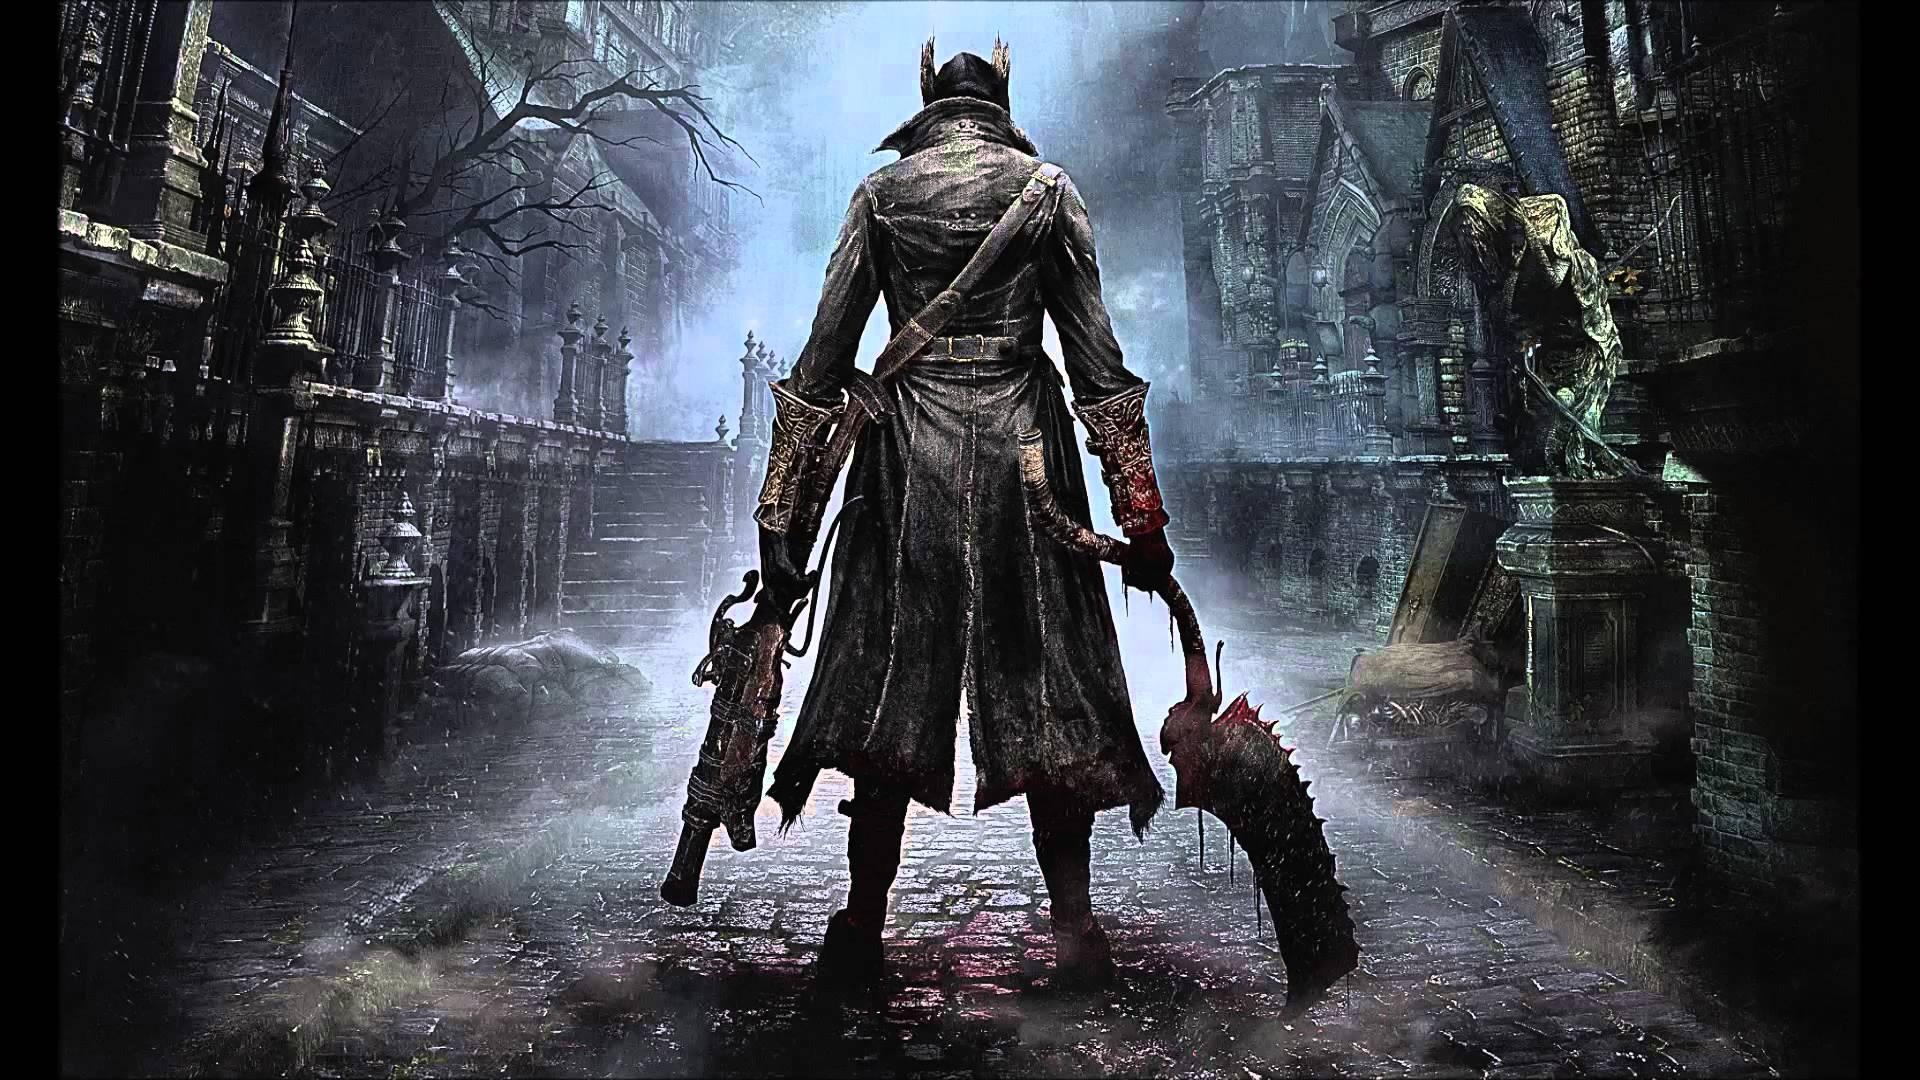 A Bloodborne Remaster Was in the Works for PS5 and PC at One Point – Rumour